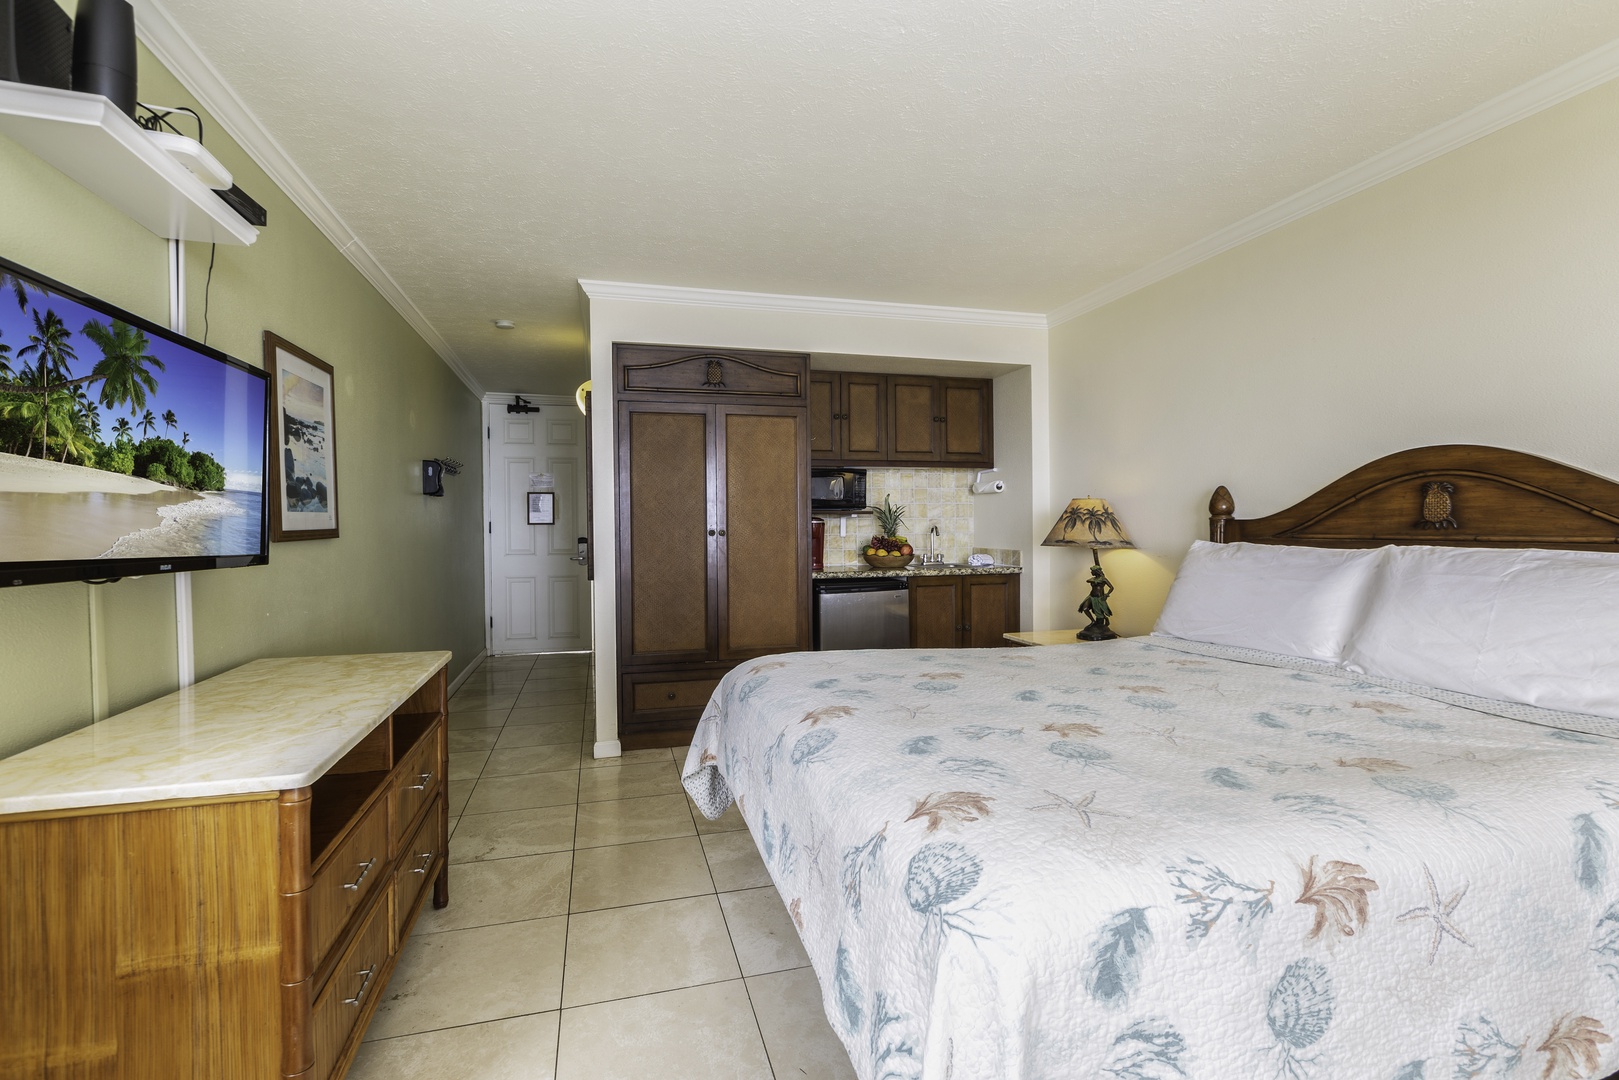 Kapa'a Vacation Rentals, Islander on the Beach #232 - Bedroom with kitchenette